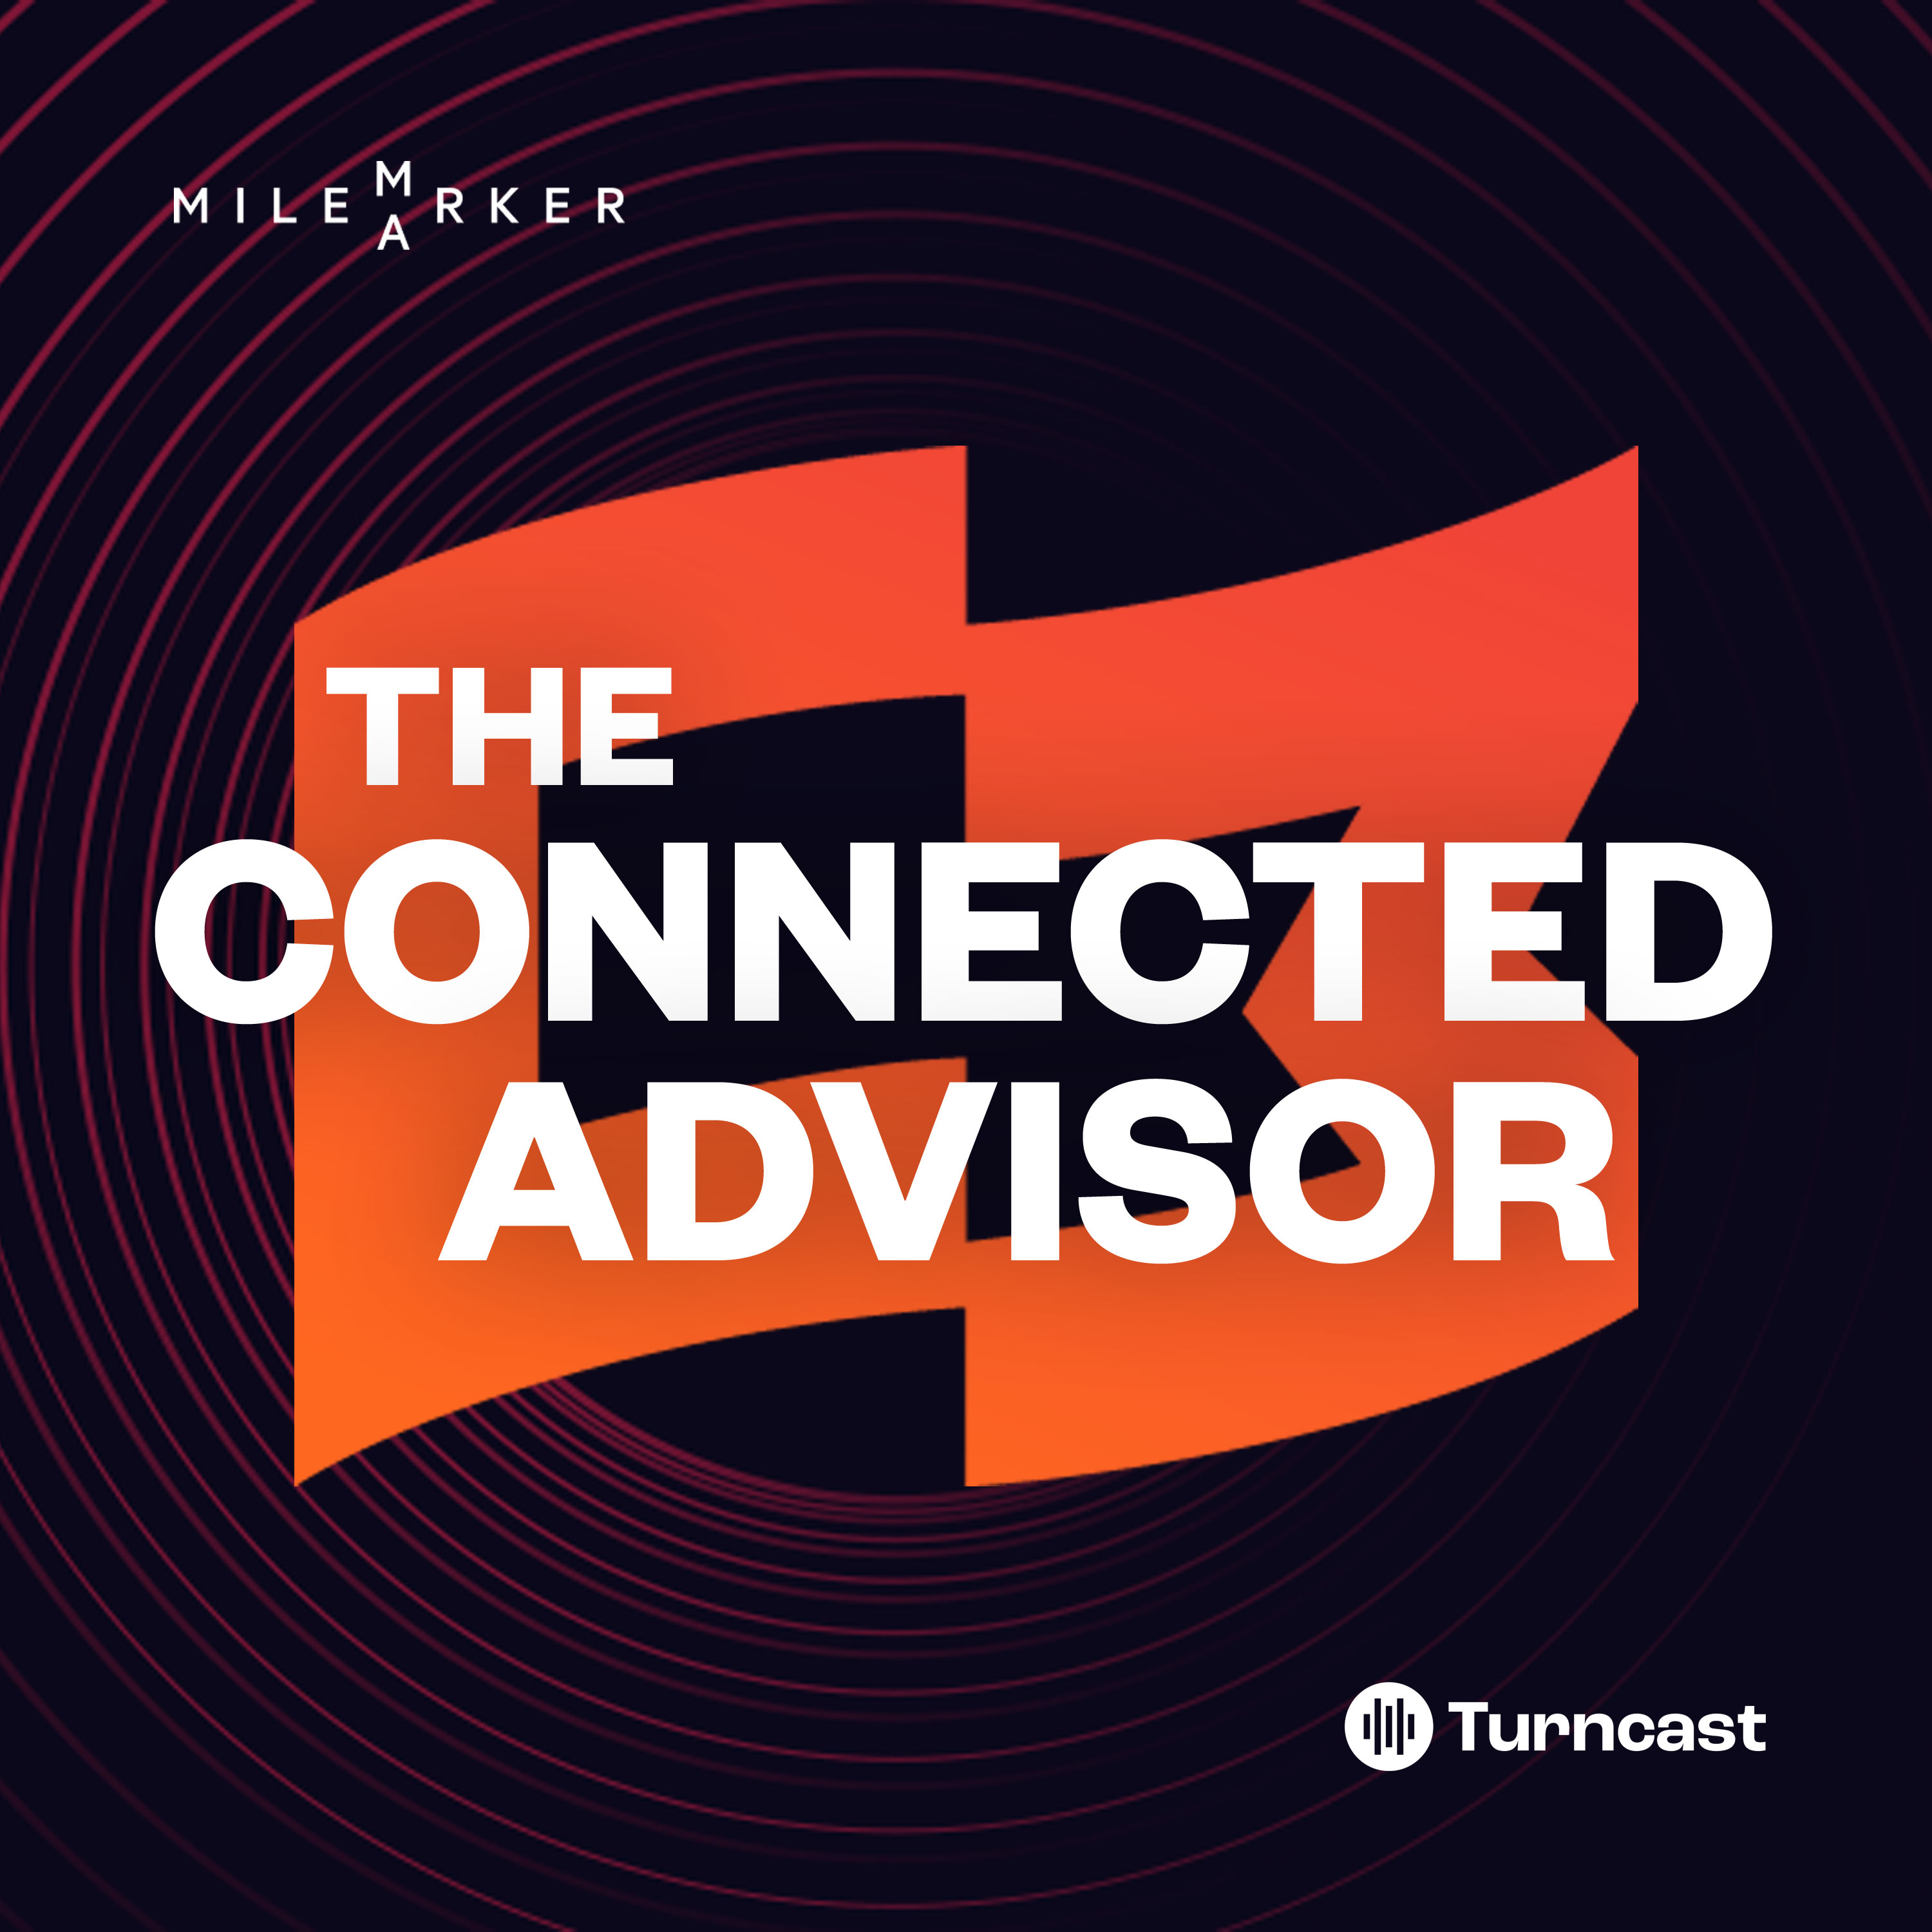 The Connected Advisor